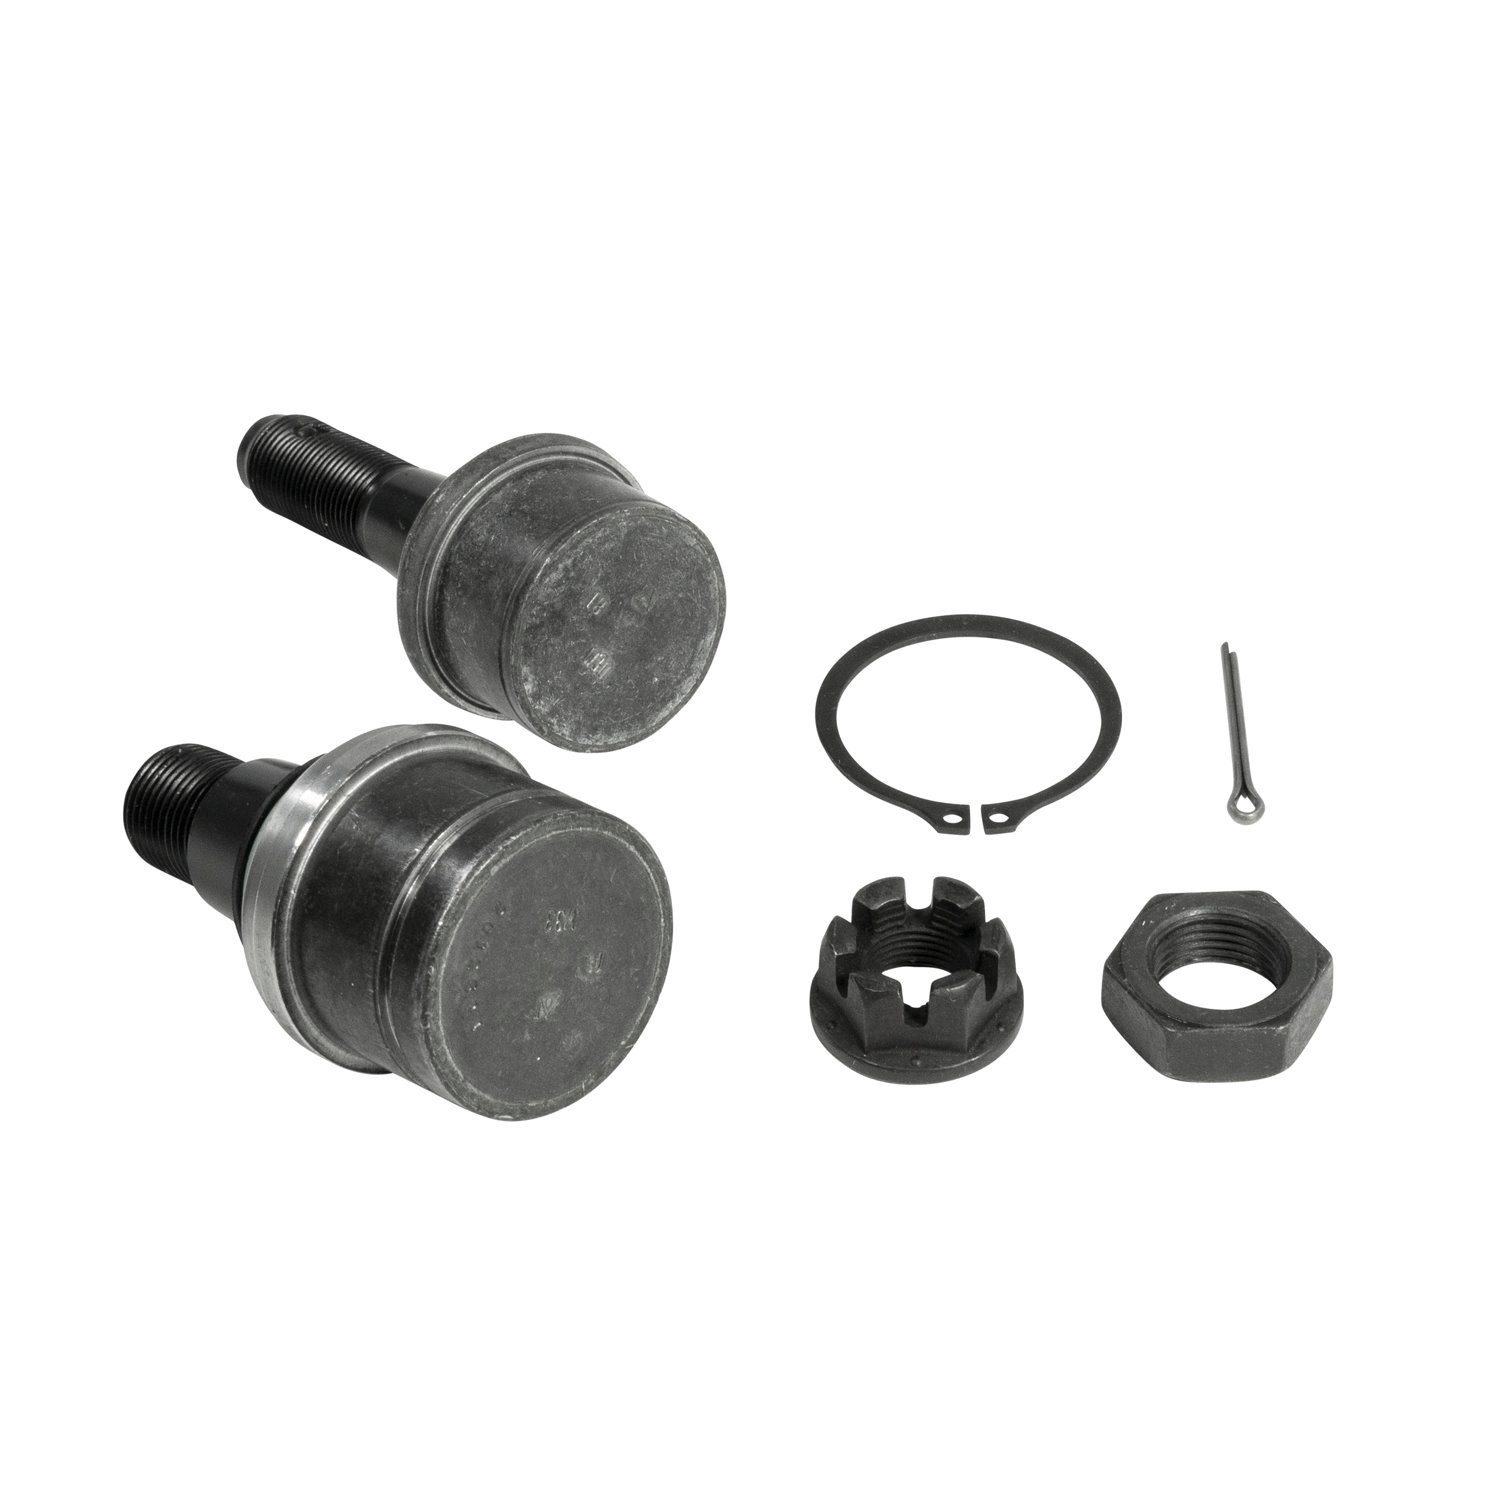 Ball Joint Kit For For Dana 50/60 Diffs, 02-05 Ford Excursion, 80-02 F250